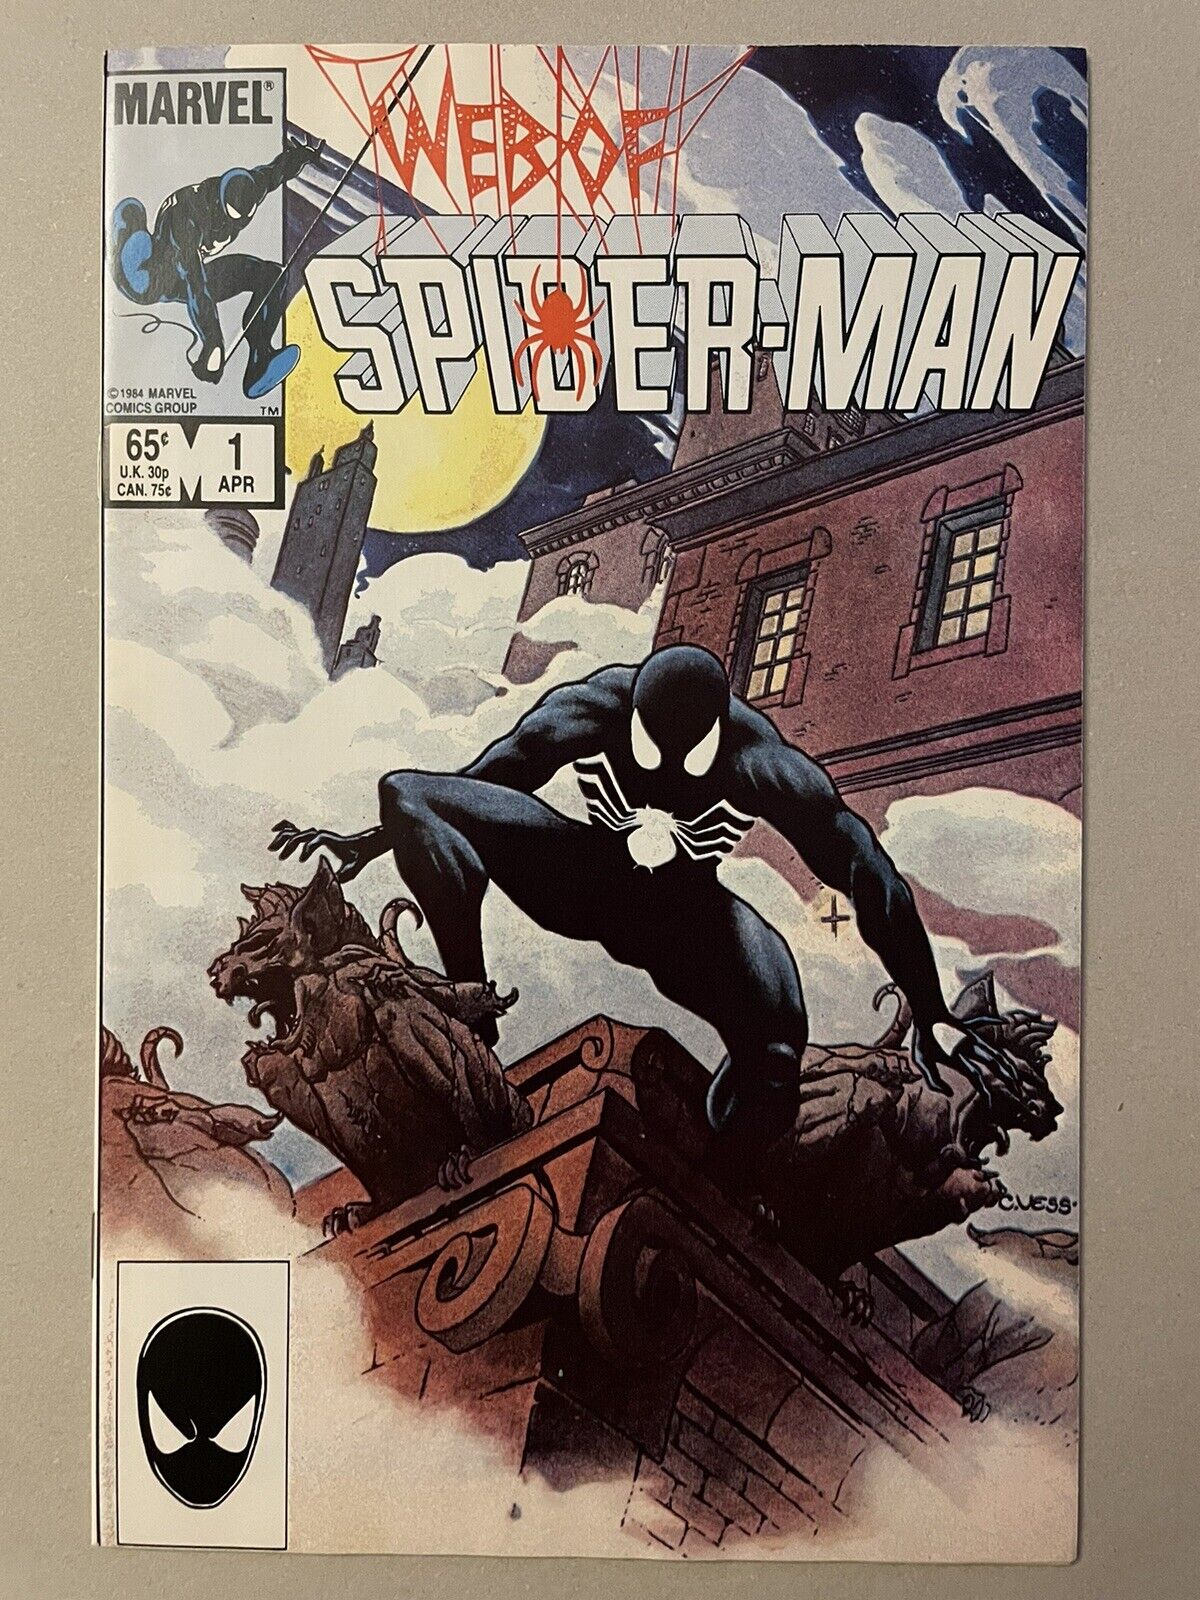 Web of Spider-Man #1 • 1985. 3rd Ongoing Spider-Man Series.